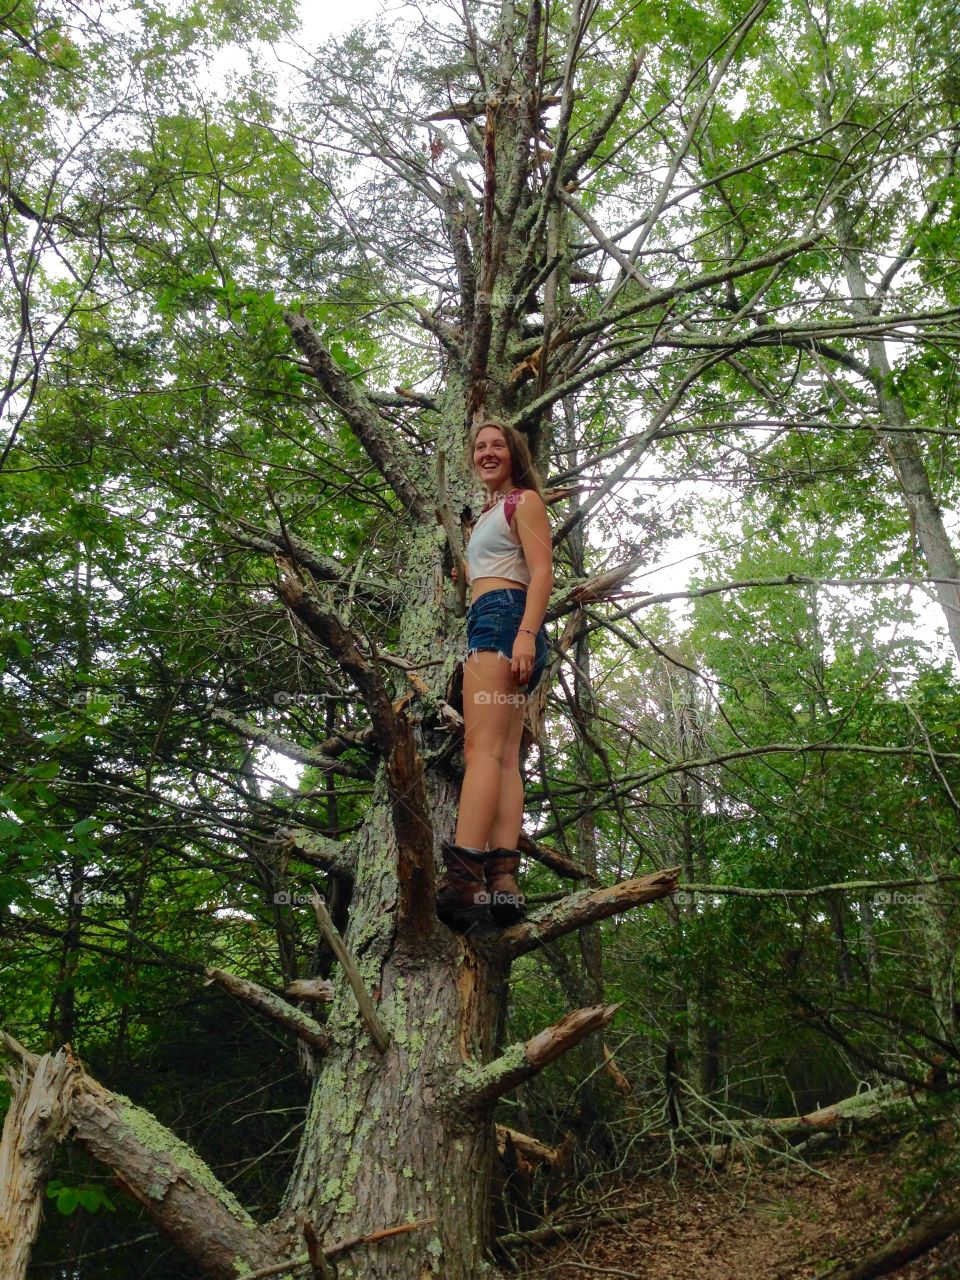 Adventuring. My friend Grace when we were on our way to some bear caves